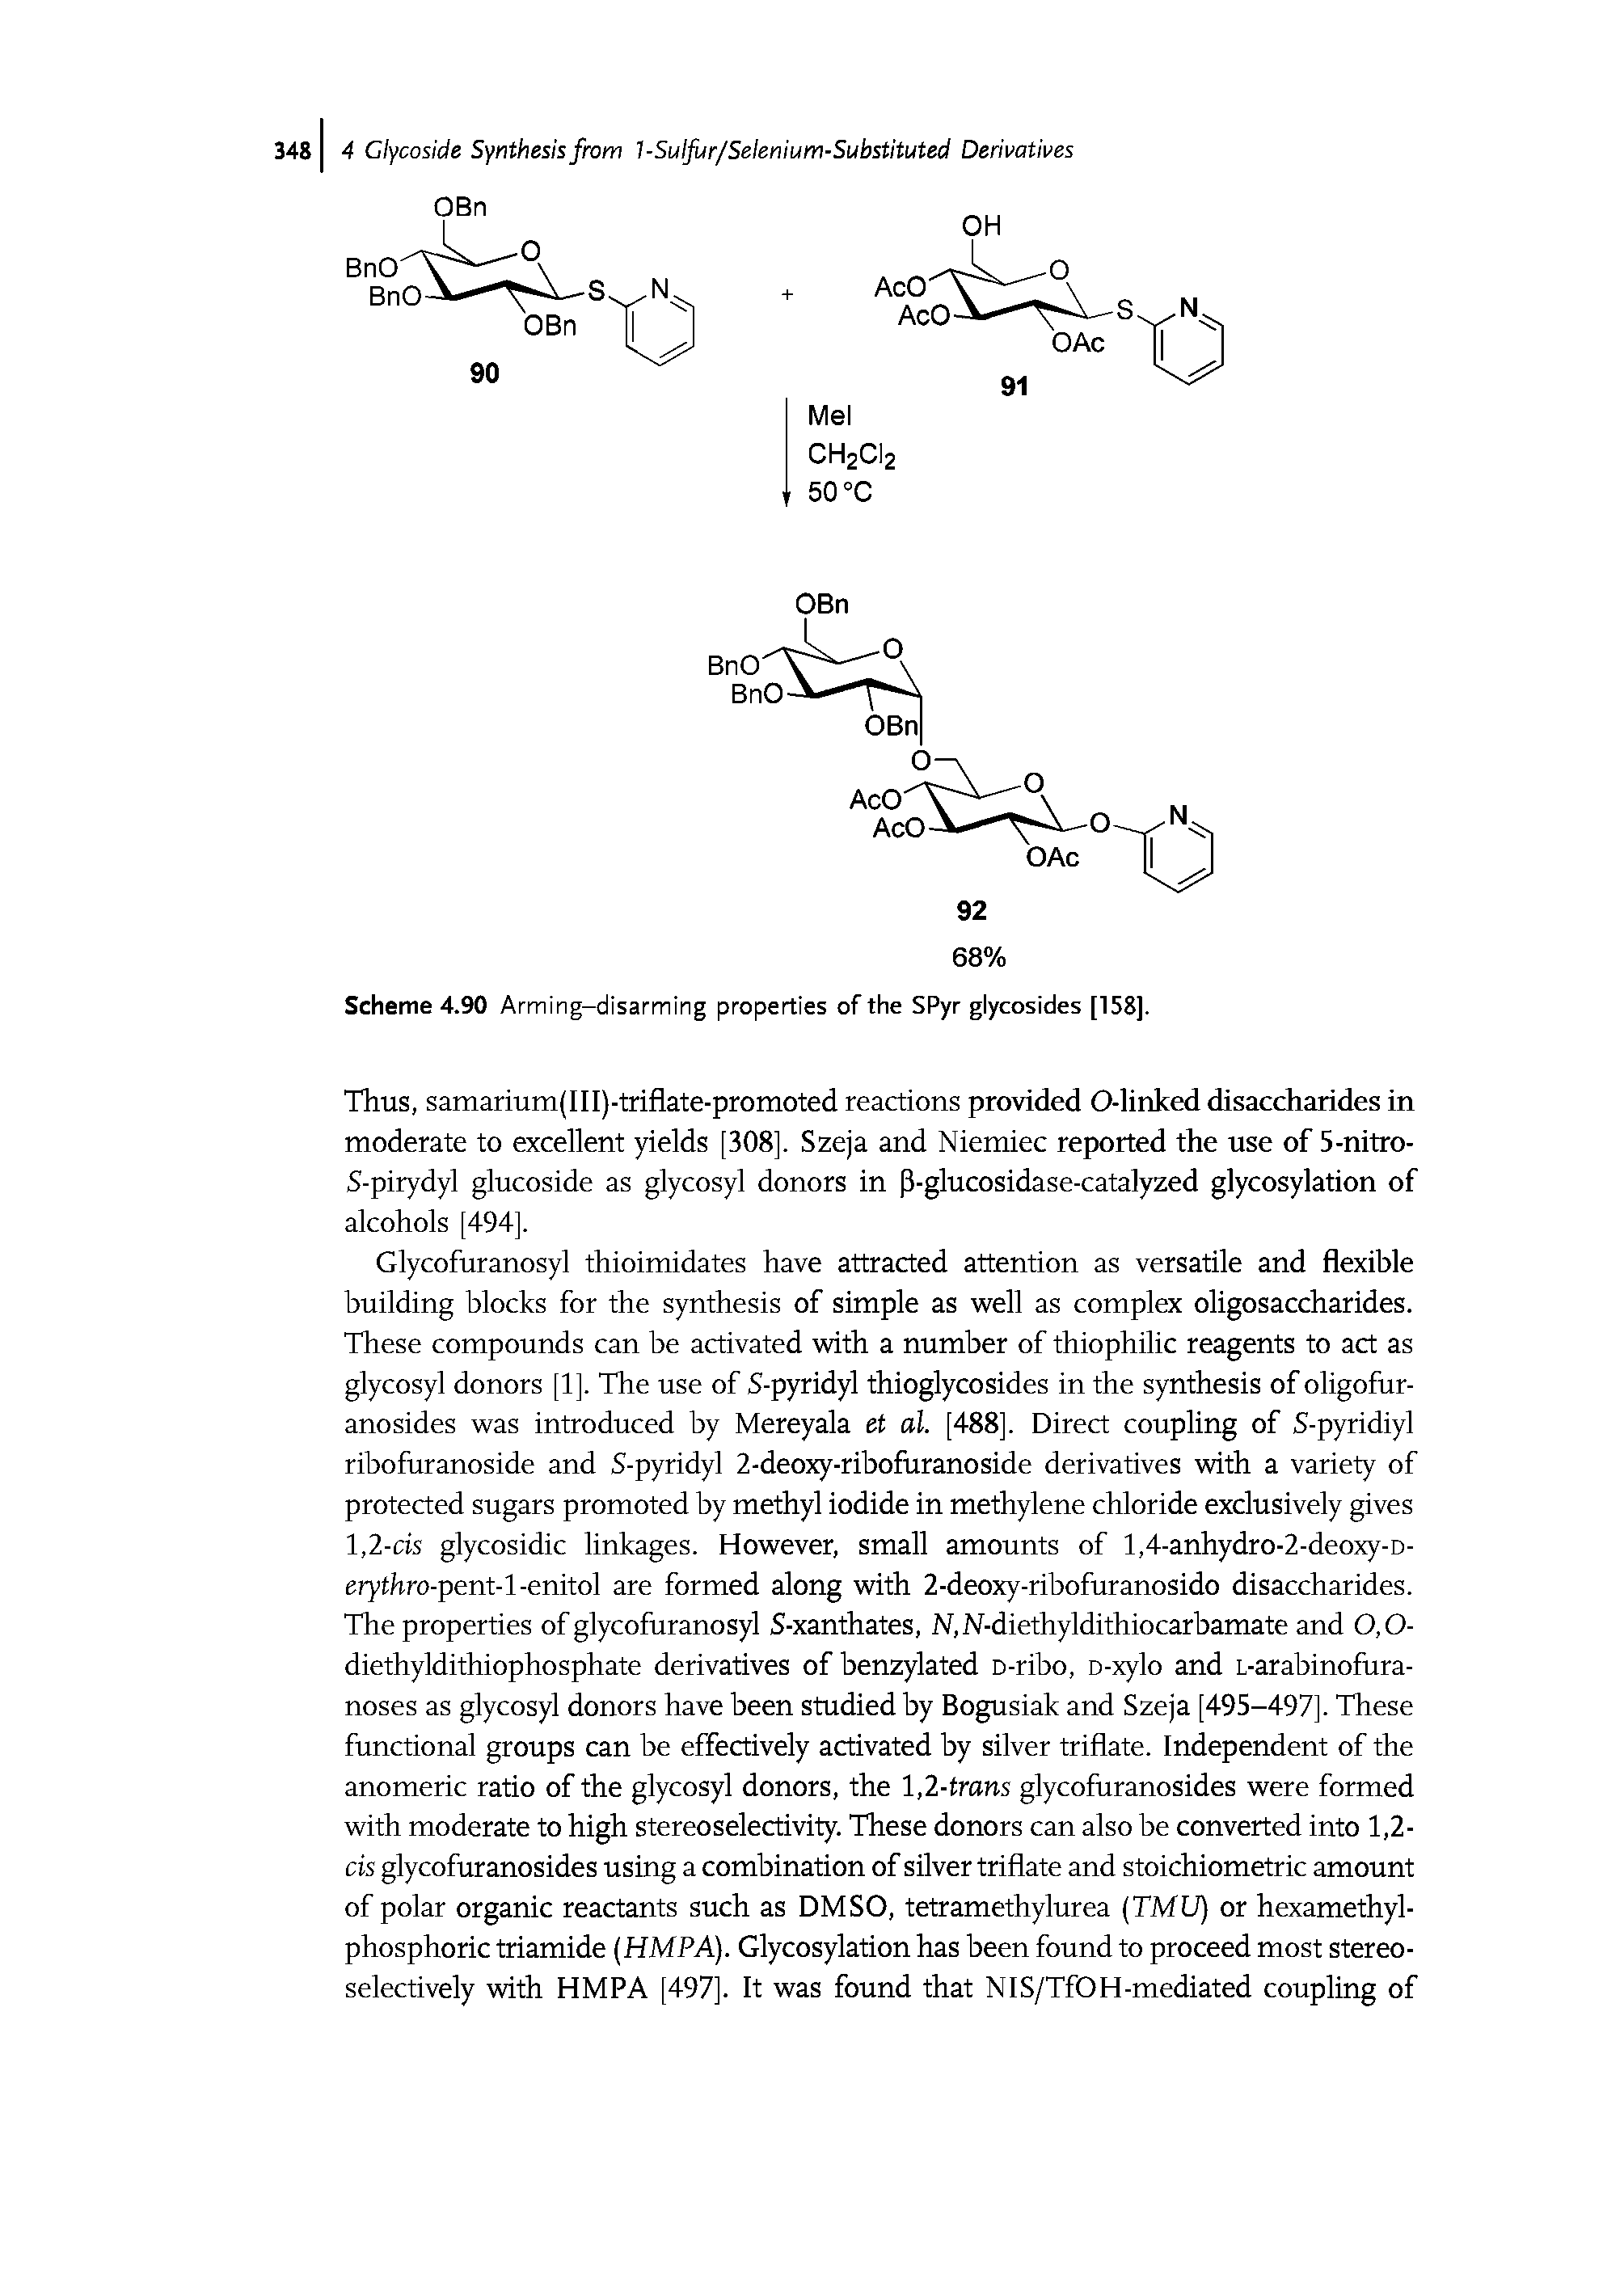 Scheme 4.90 Arming-disarming properties of the SPyr glycosides [158].